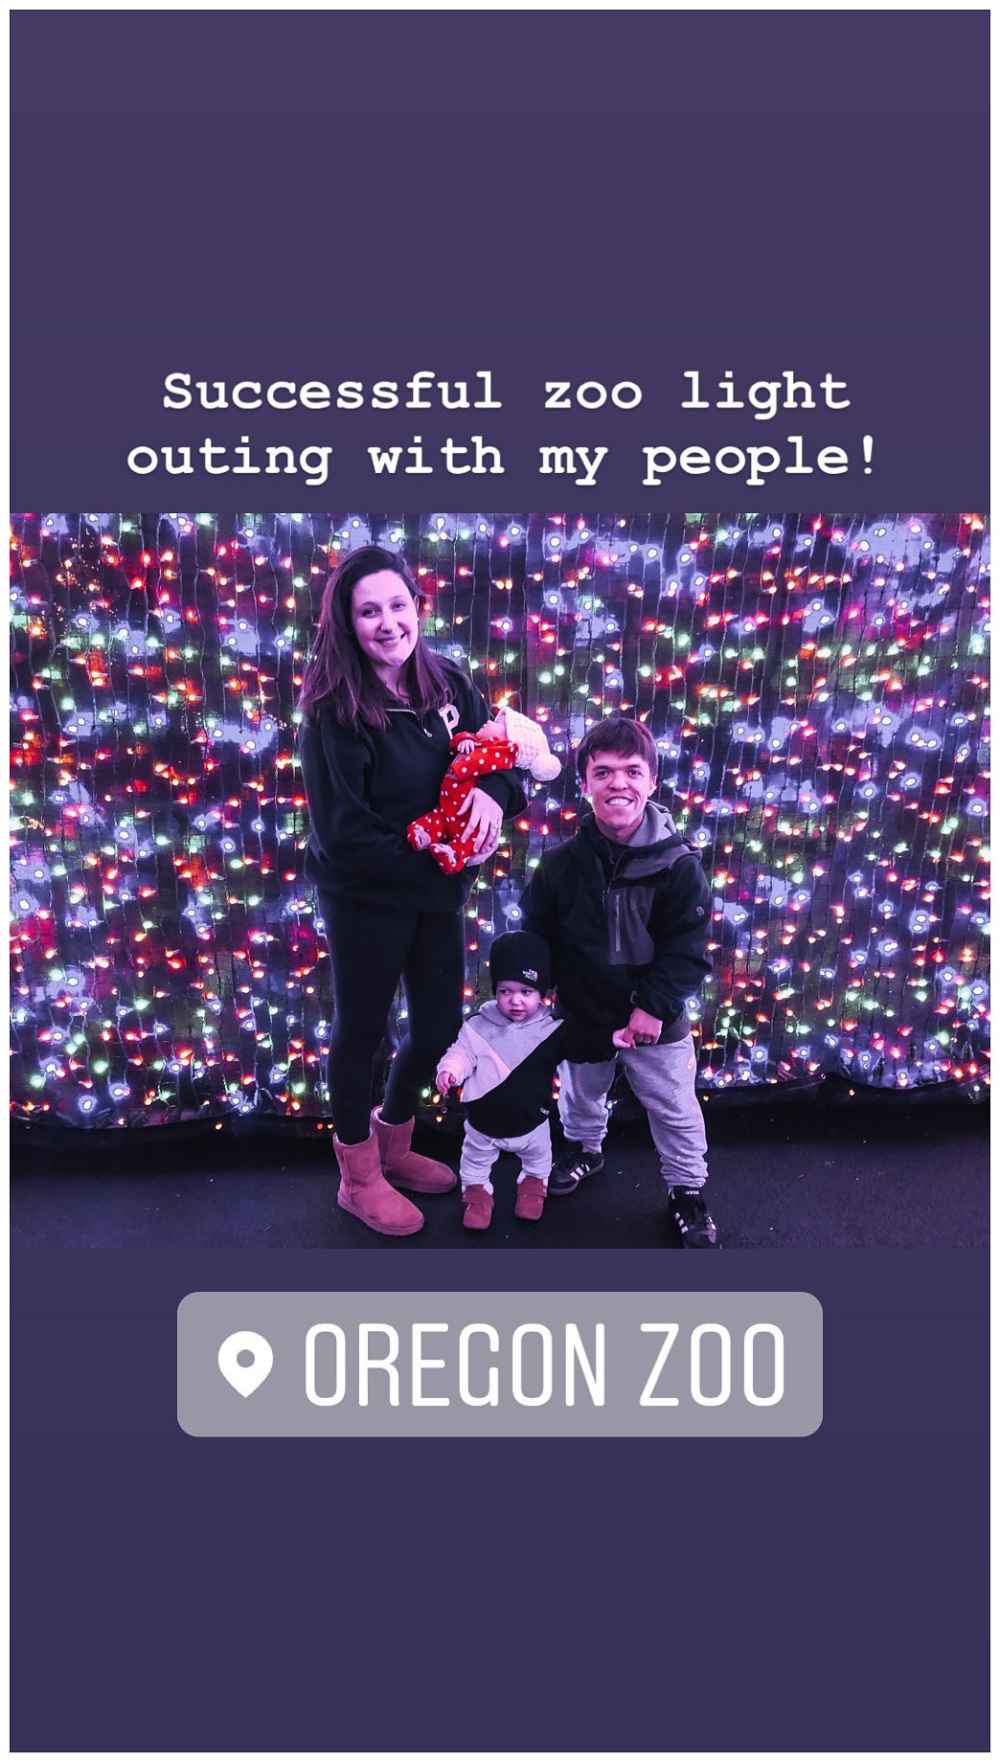 Tori Roloff and Zach Roloff Have Successful Christmas Lights Outing